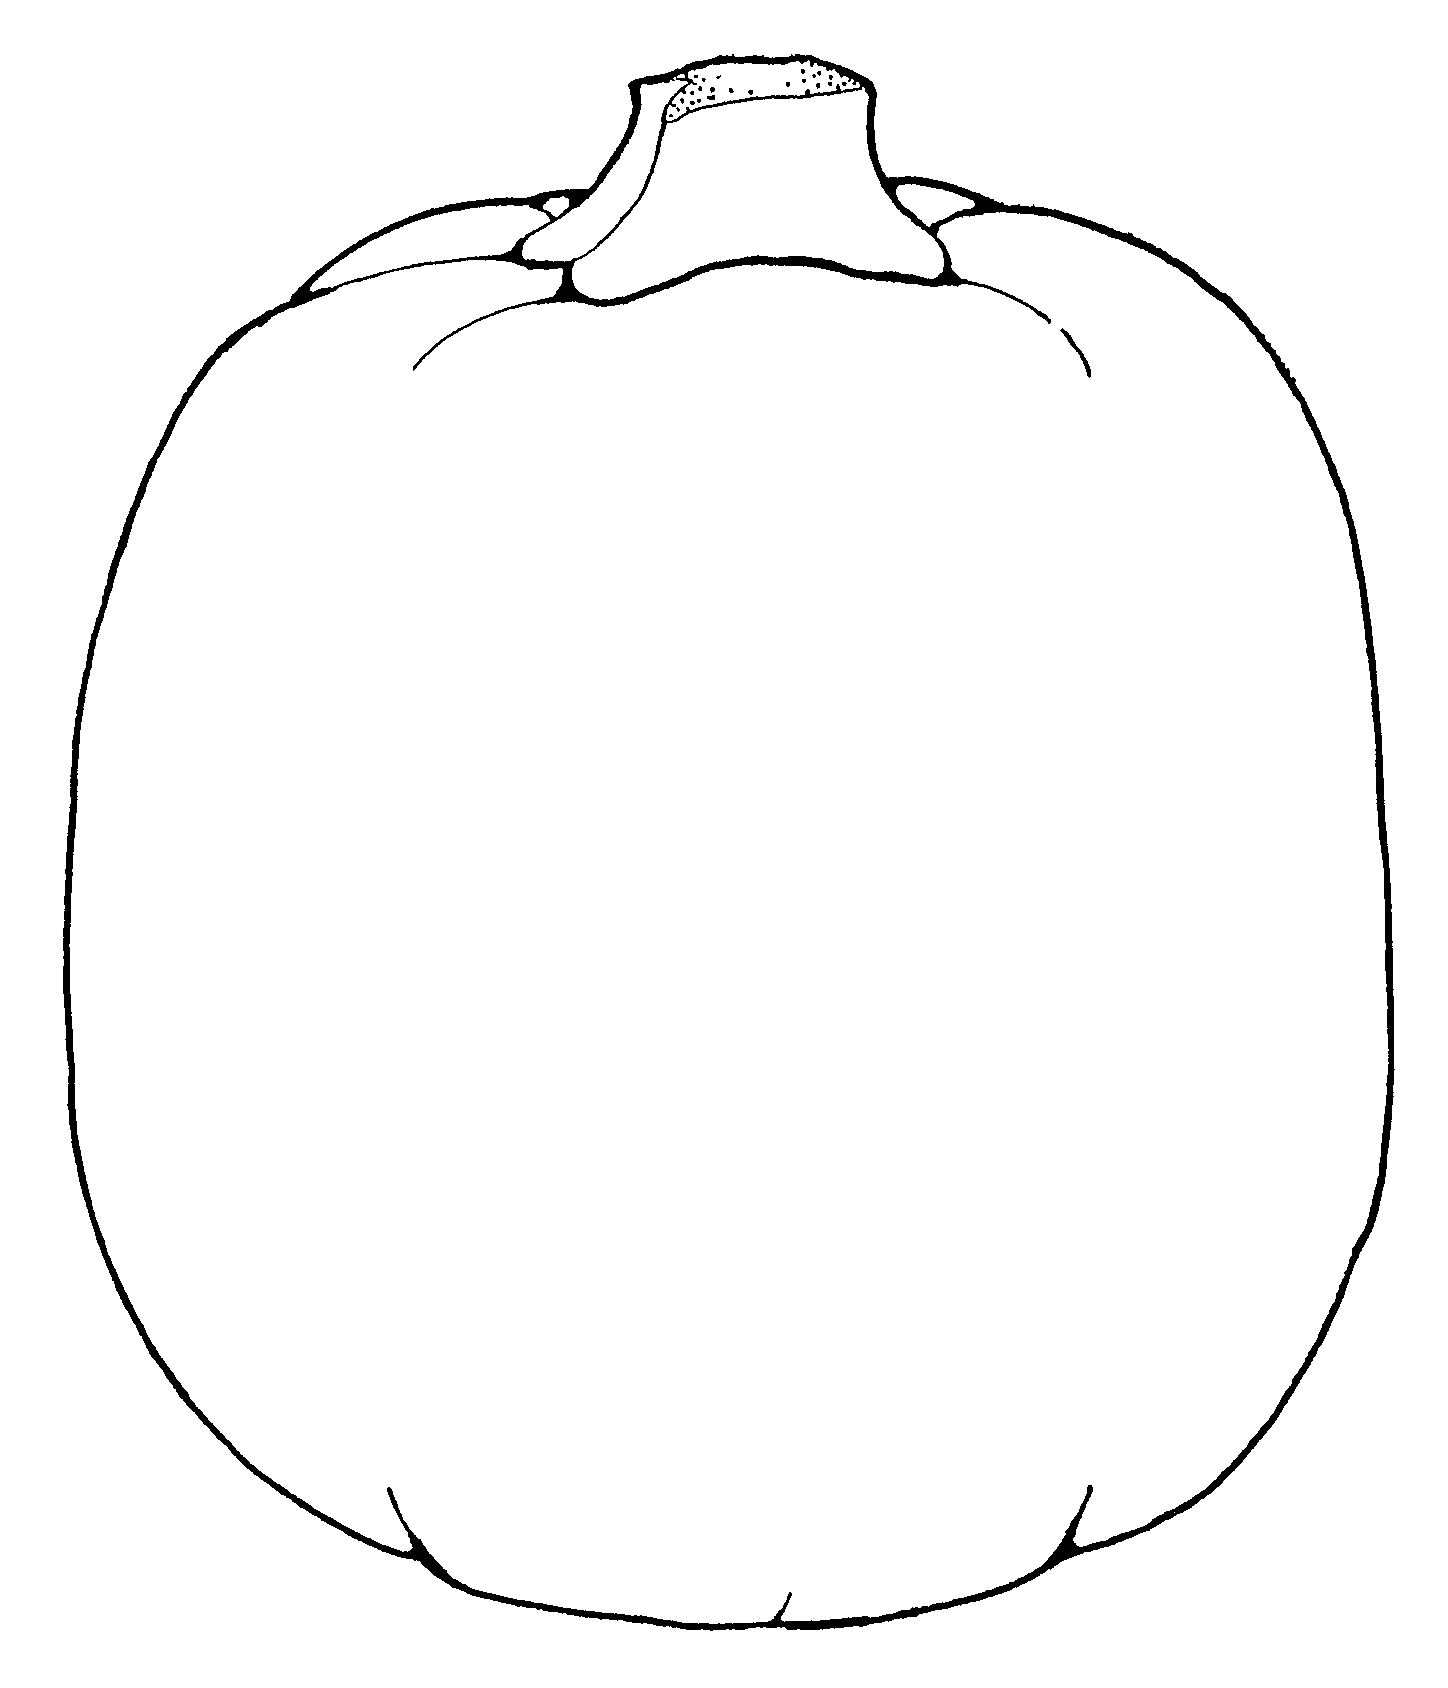 Pumpkin Outline Drawing HalloweenFunky com Coloring Home